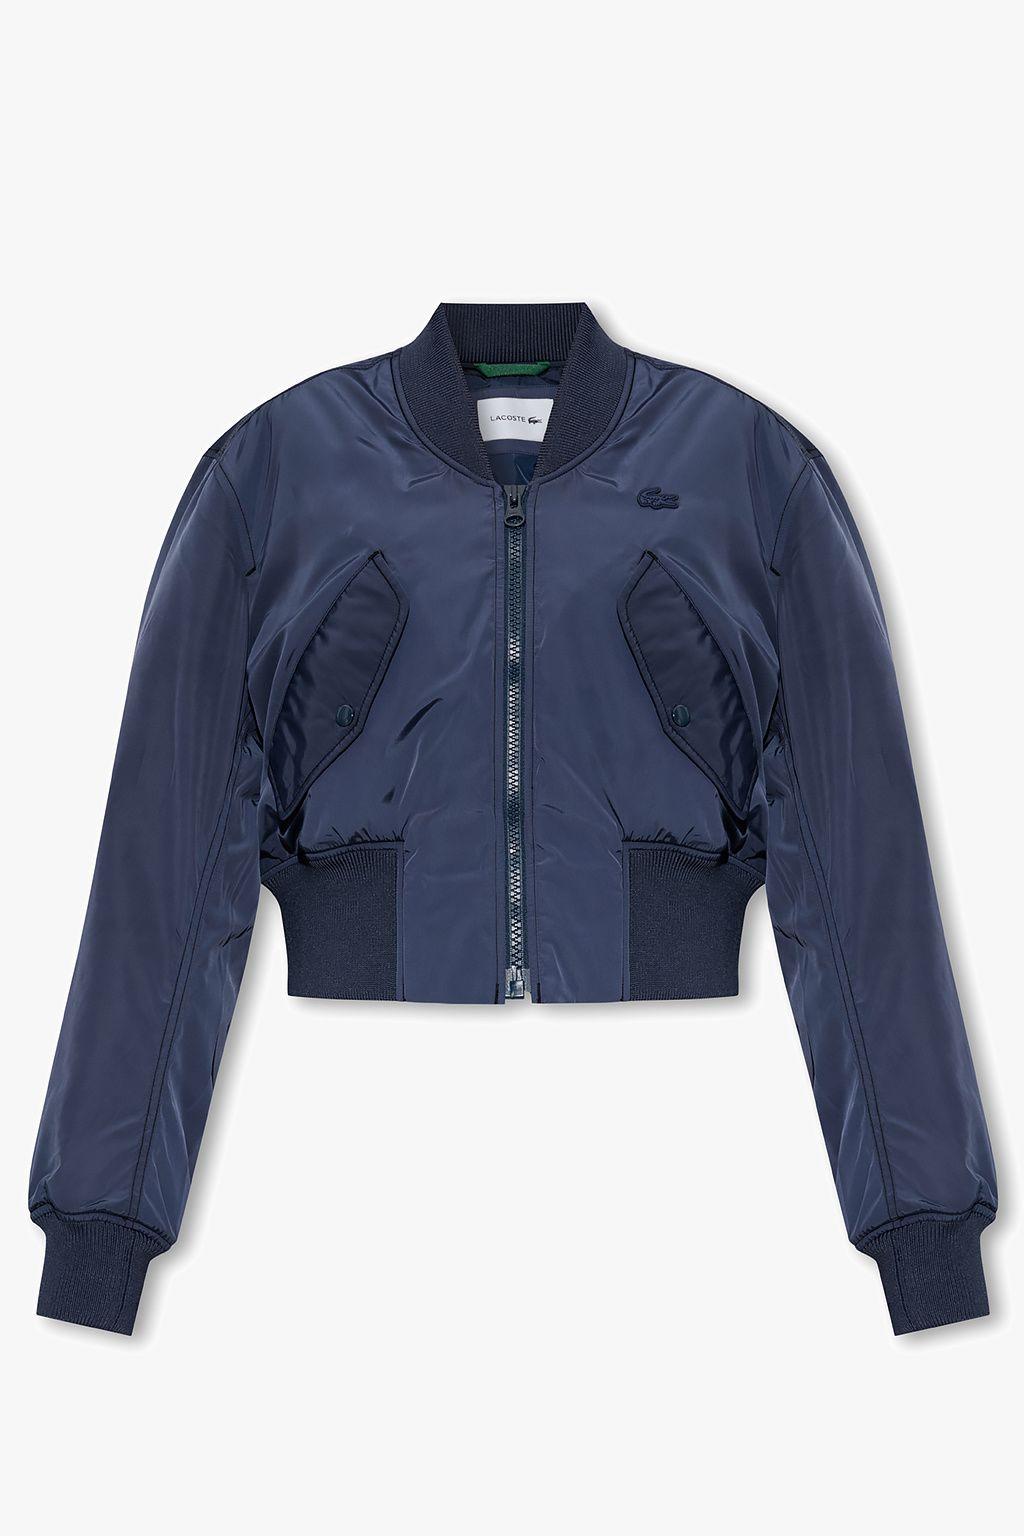 Lacoste Cropped Bomber Jacket in Blue | Lyst